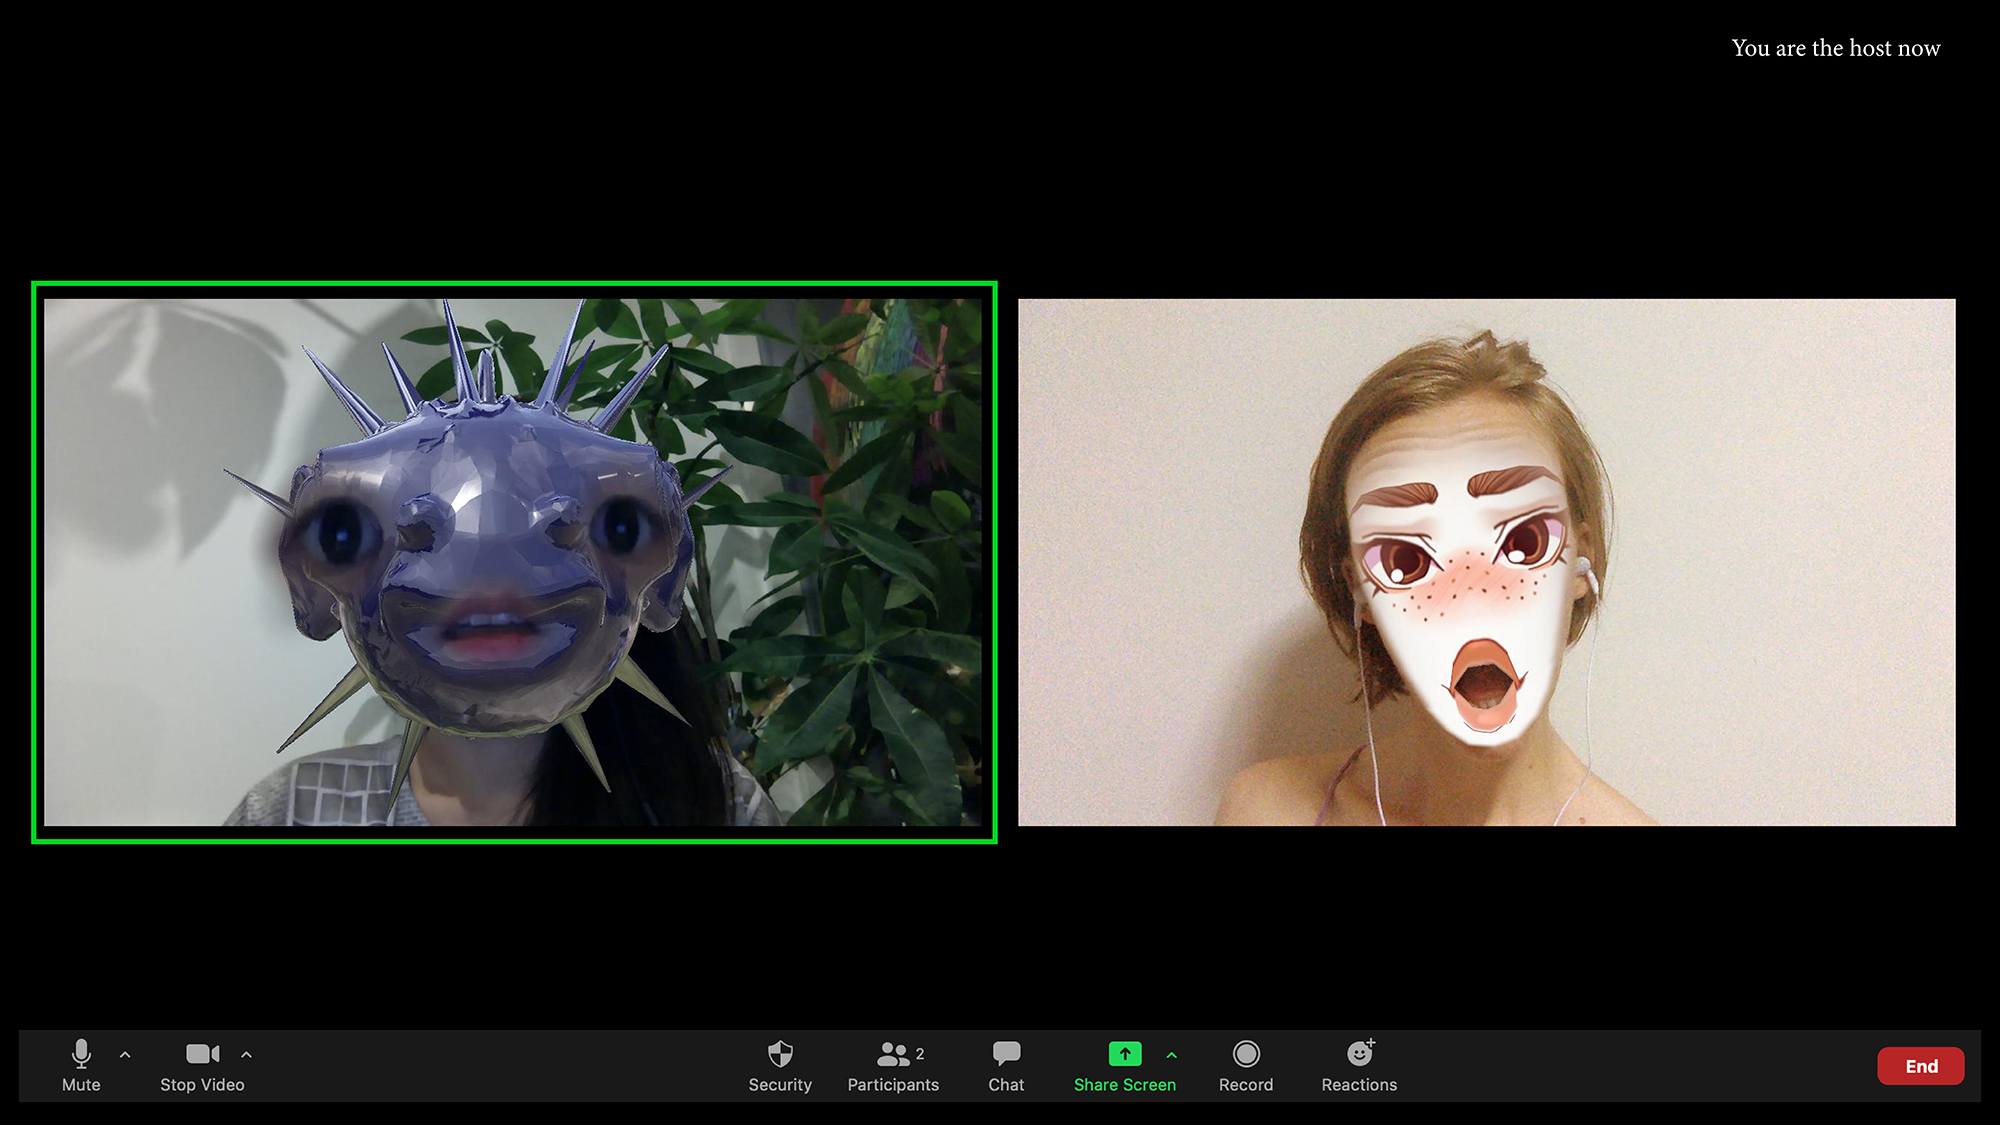 A screenshot of a video call. The faces of the artists have been digitally altered. Jemima appears to have a shark head, whereas Kei apppears like an illustration.